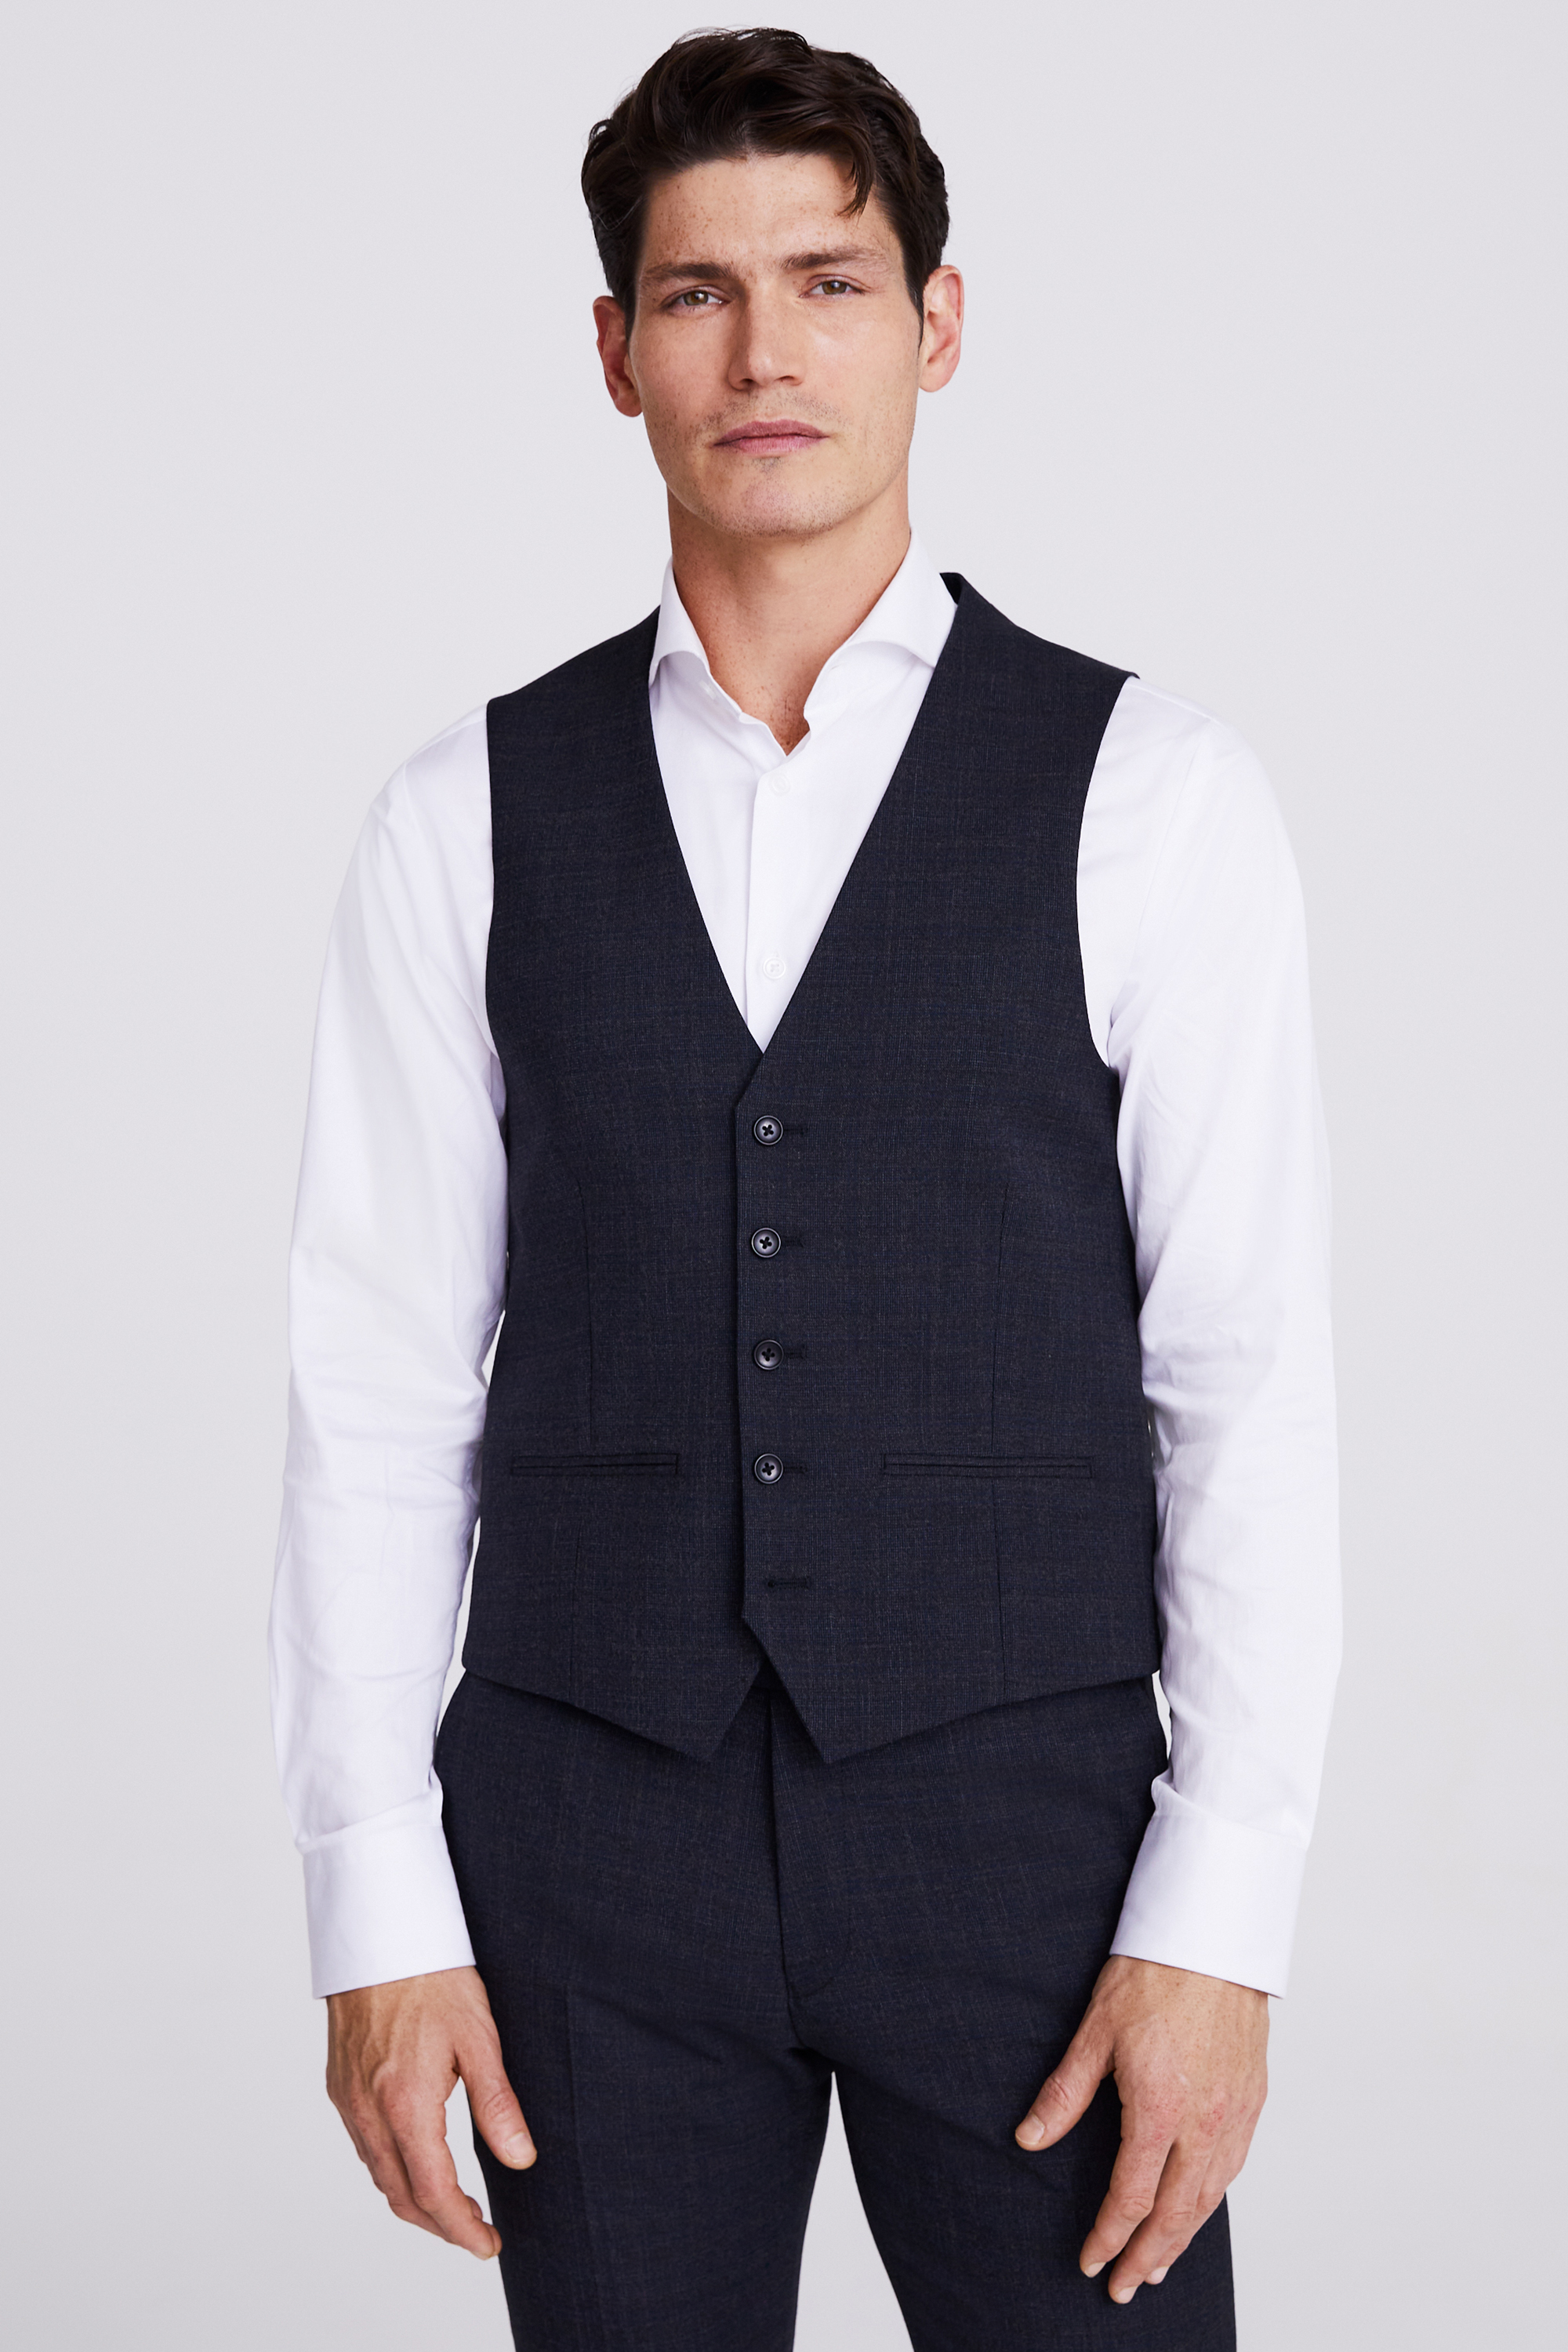 Tailored Fit Charcoal with Navy Check Waistcoat | Buy Online at Moss